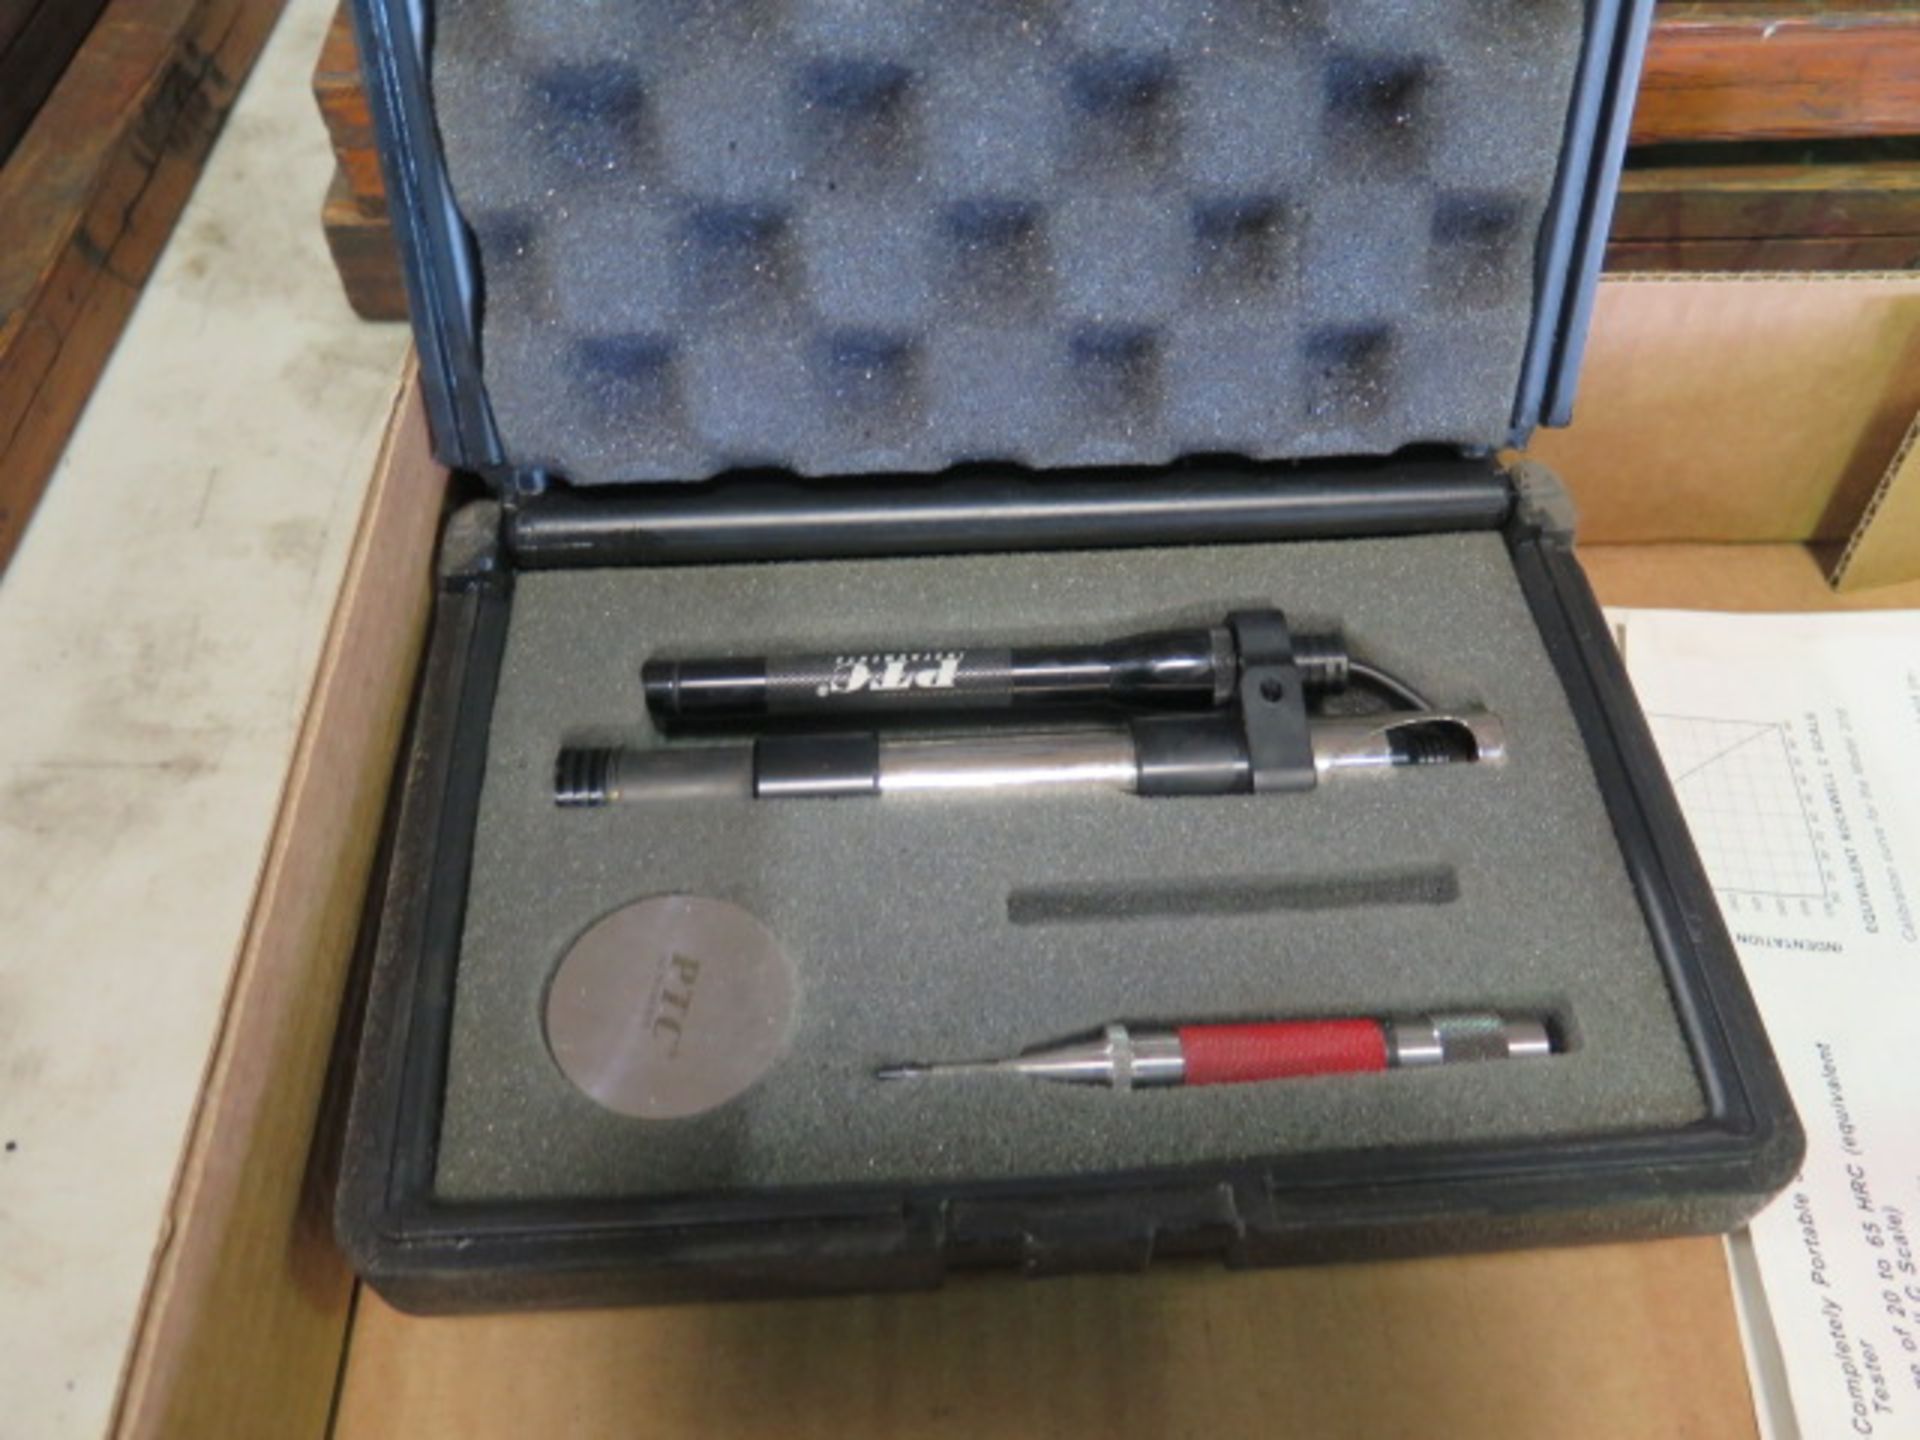 PTS mdl. 316 Portable Hardness Tester (SOLD AS -IS - NO WARANTY) - Image 2 of 5